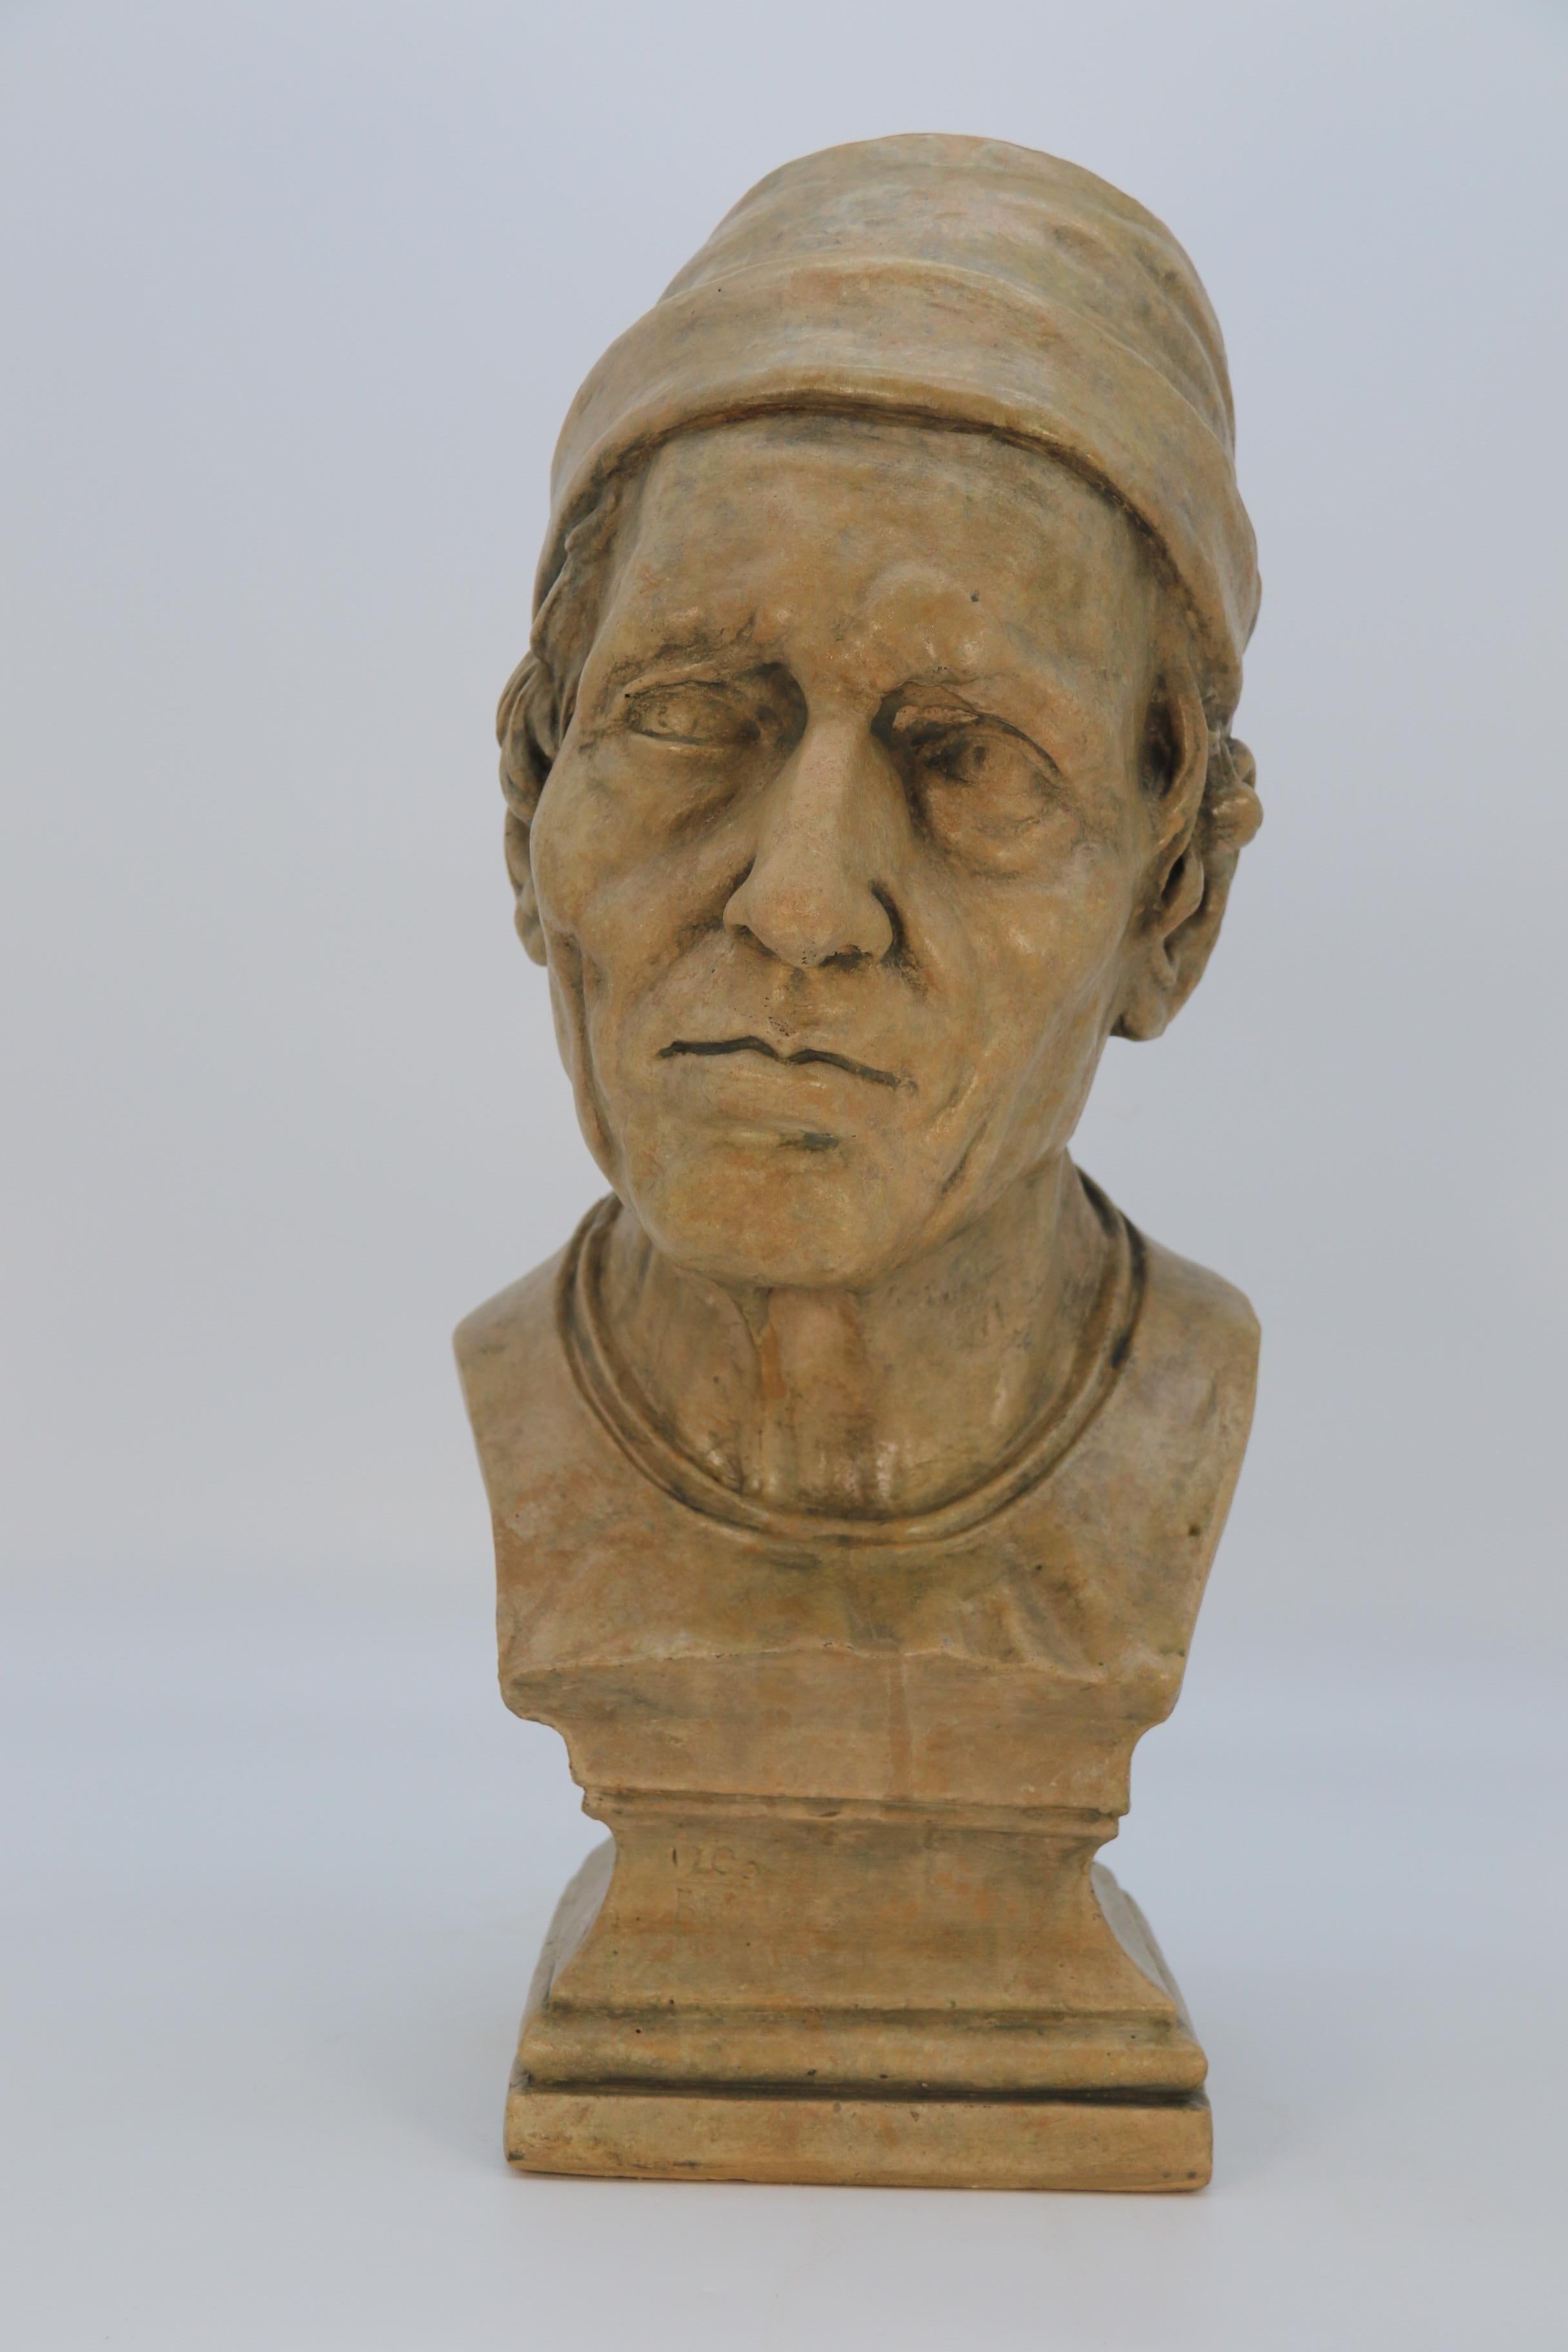 This most impressive life sized characterful plaster bust dates to circa 1860. It is finely modelled and depicts a medieval gentleman wearing a simple hat and tunic top. The features of his face are brilliantly defined.

This large plaster bust has